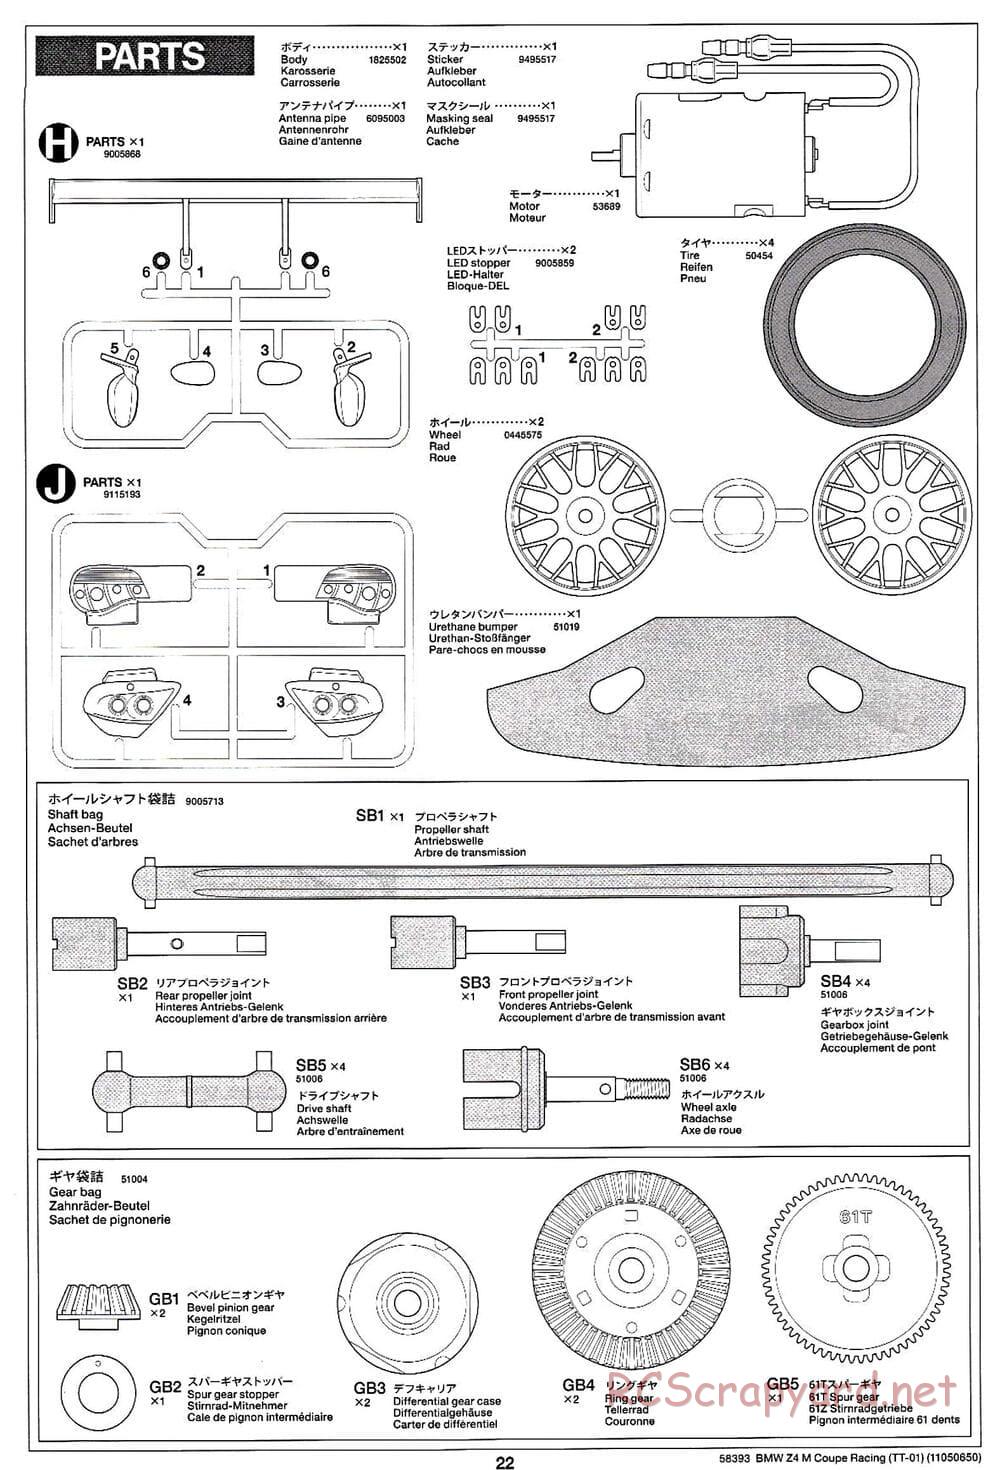 Tamiya - BMW Z4 M Coupe Racing - TT-01 Chassis - Manual - Page 22